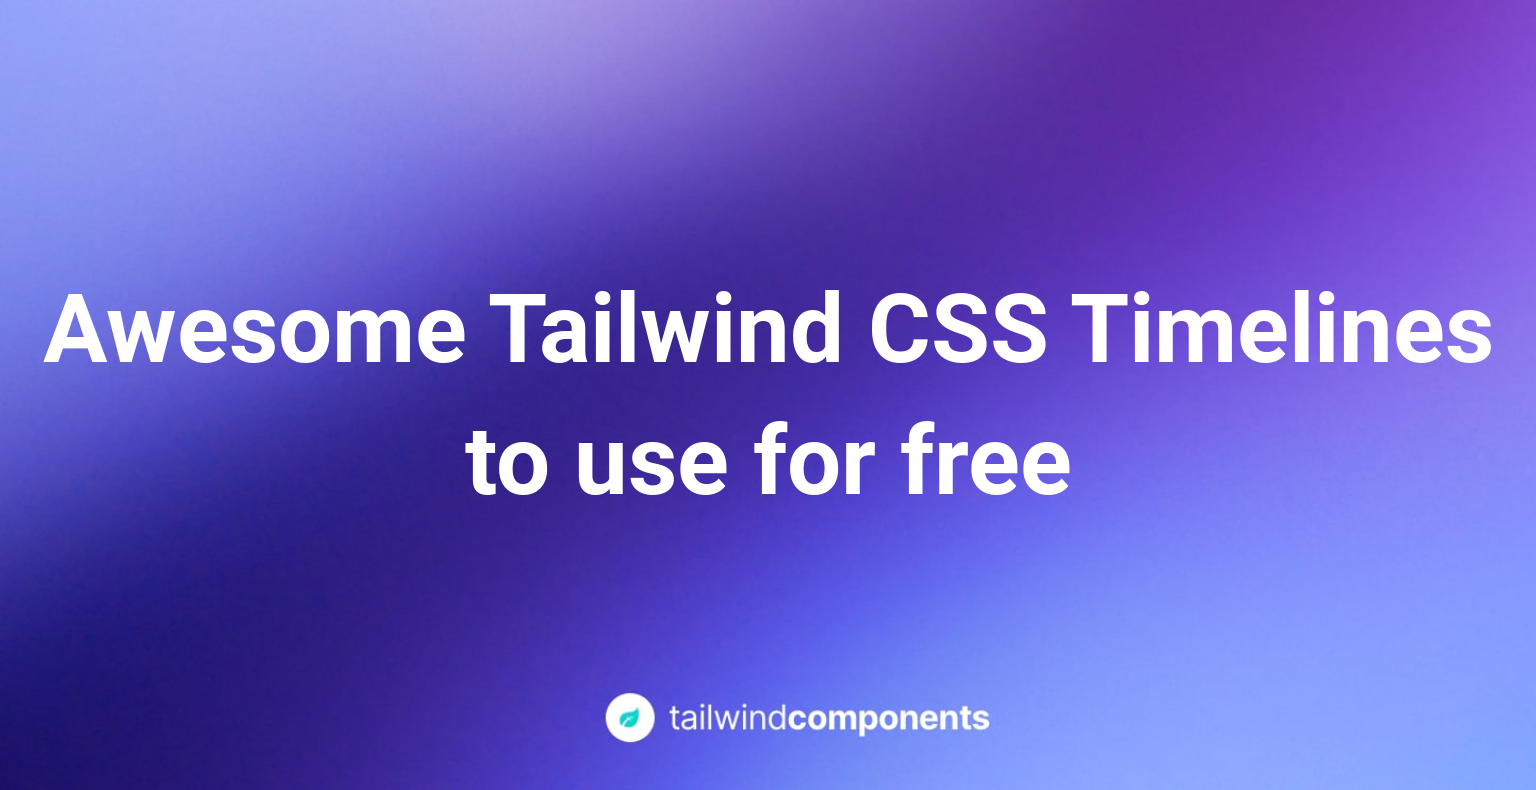 Awesome Tailwind CSS Timelines to use for free Image